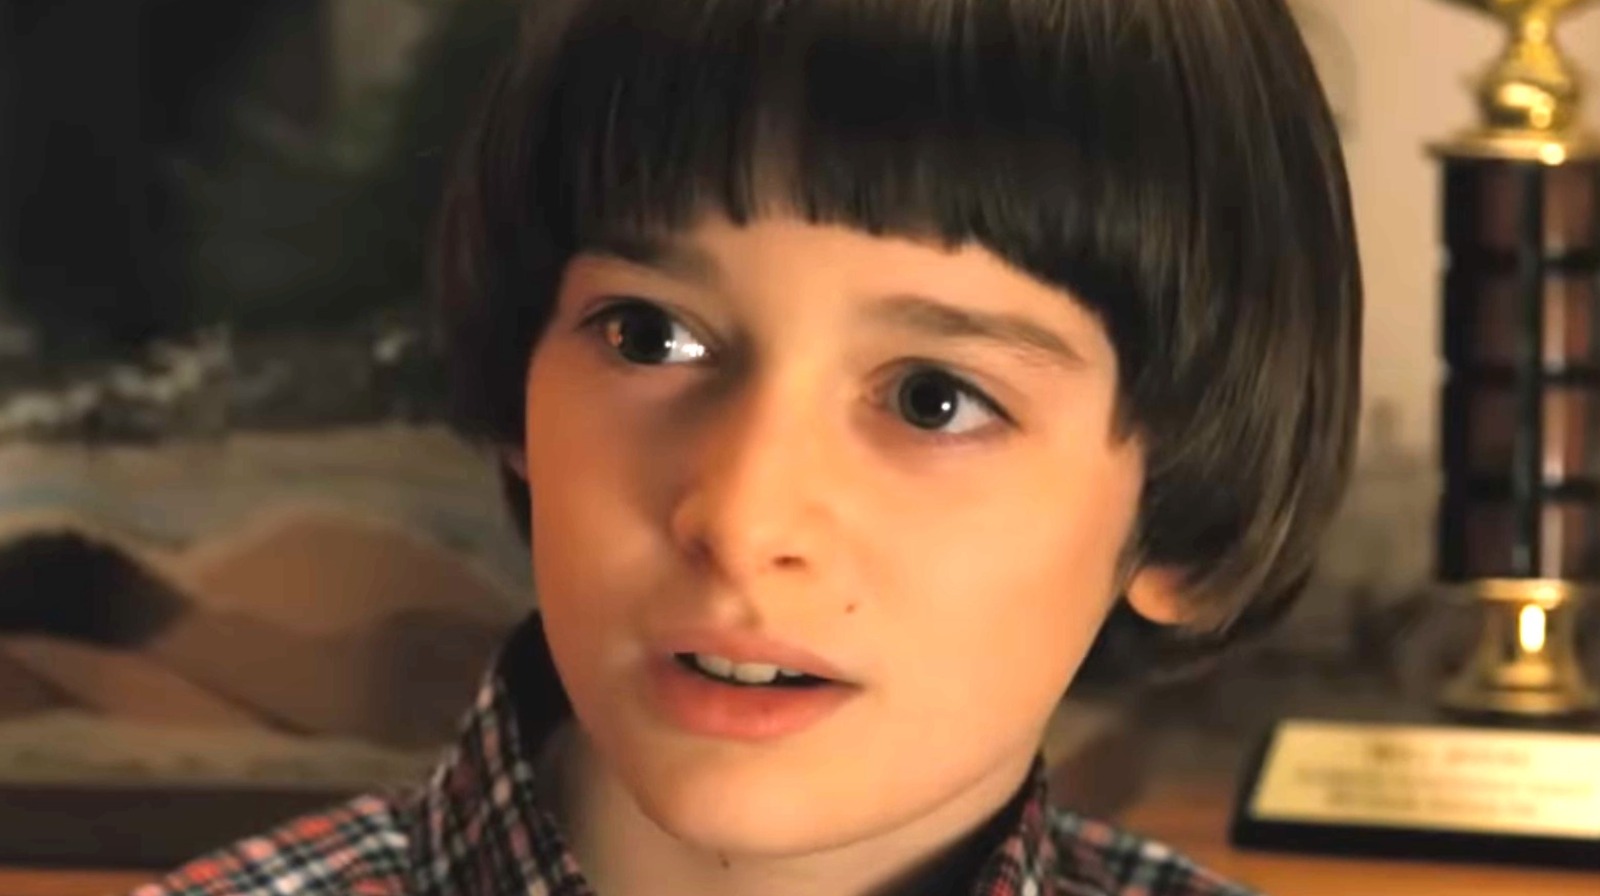 Stranger Things season 2: Is Will Byers going to die? Is Will